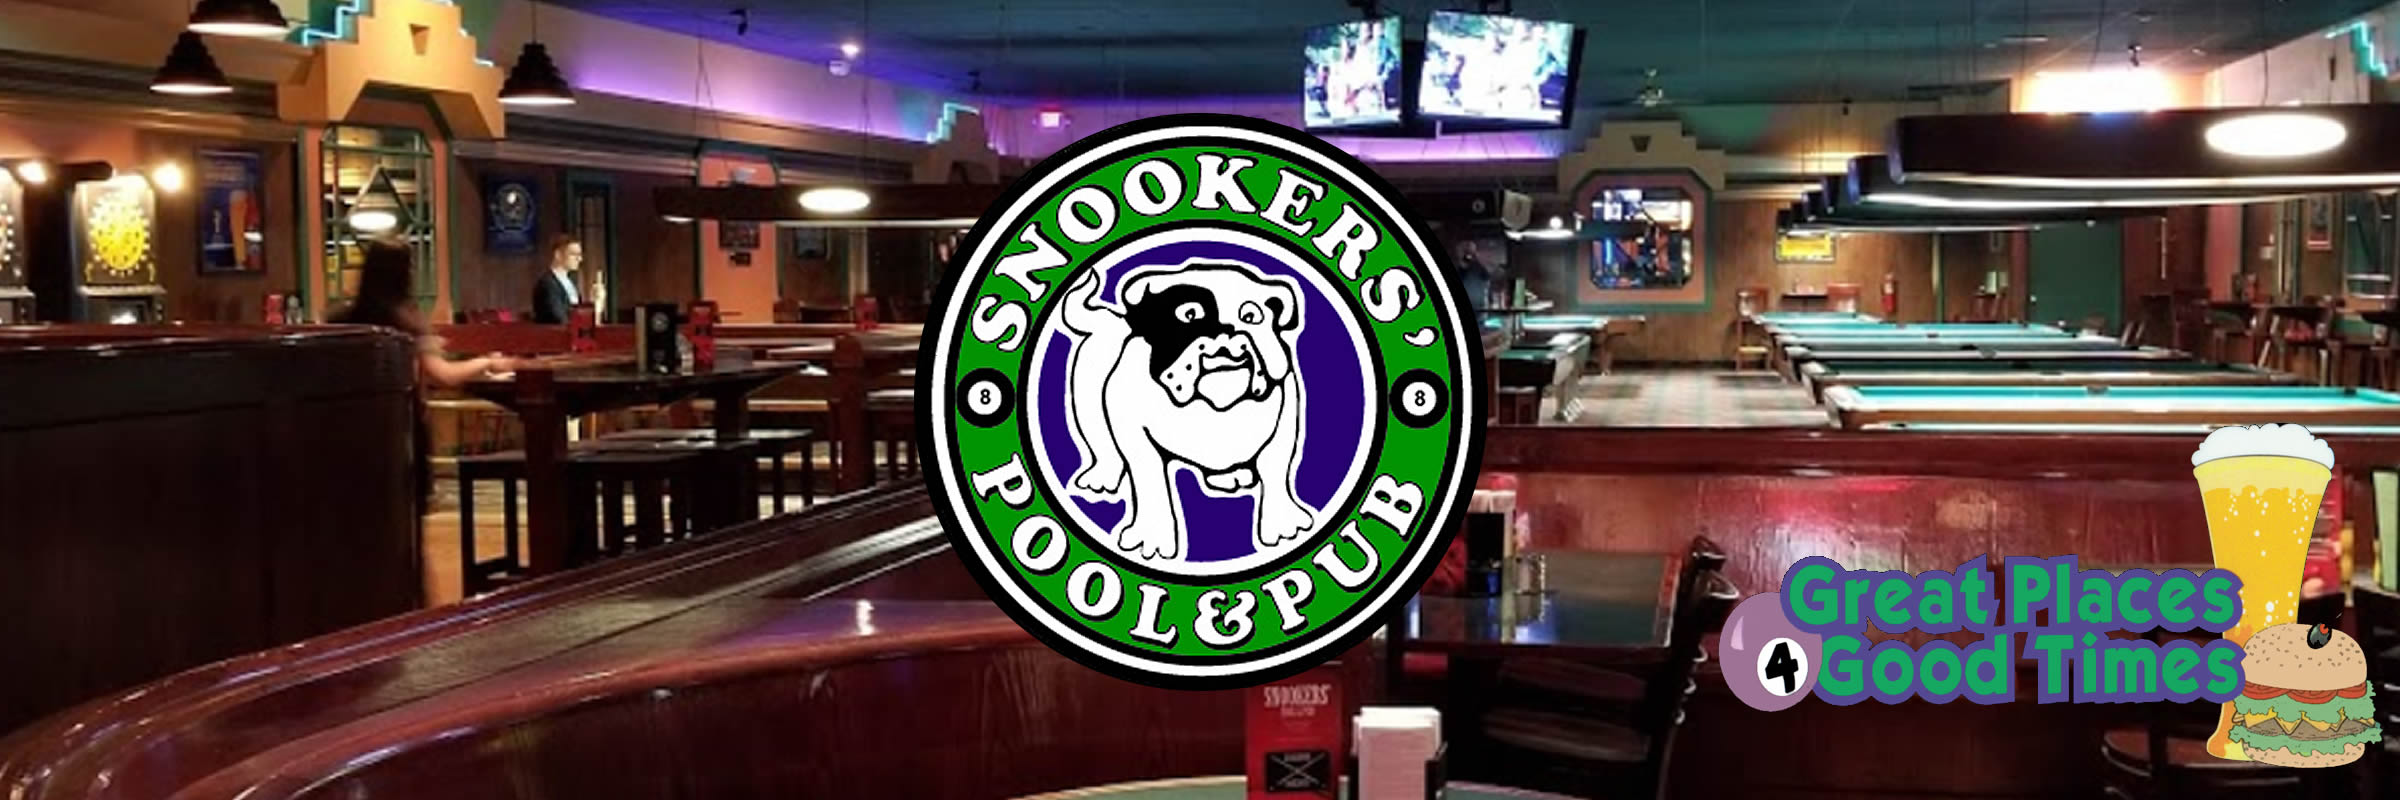 Welcome to SNOOKERS